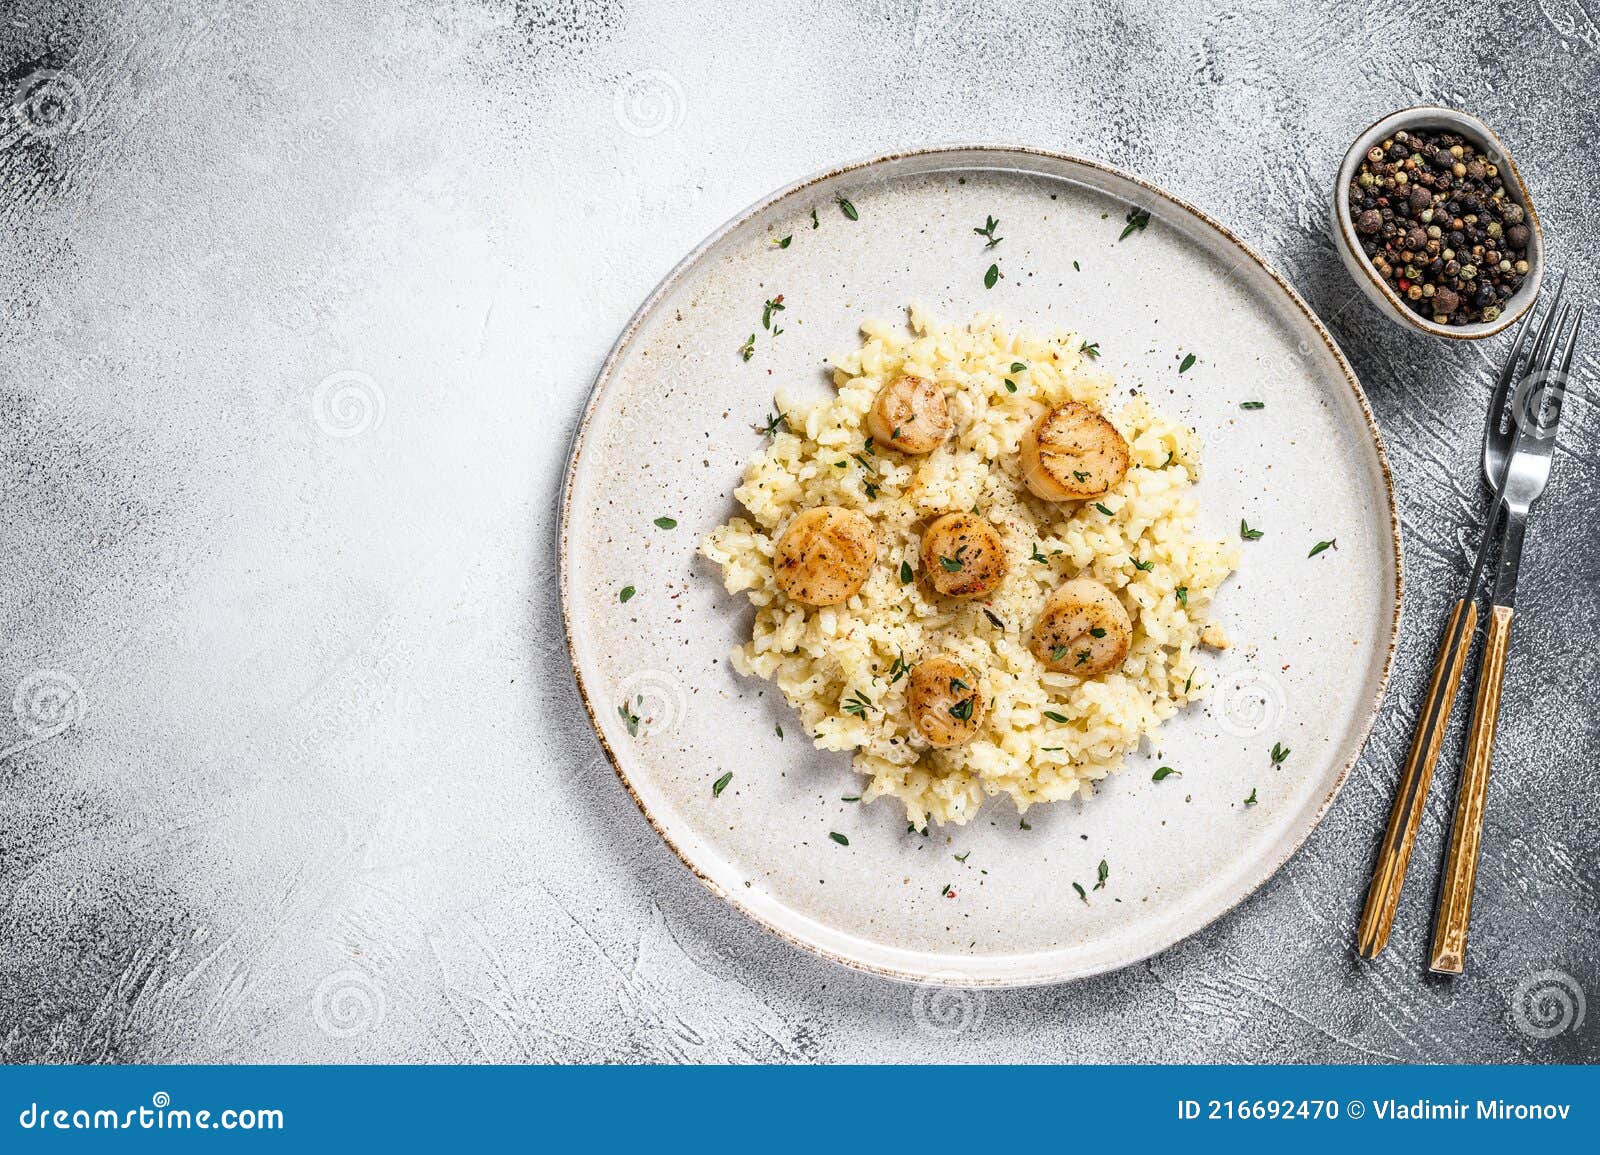 italian risotto with pan seared sea scallops. white background. top view. copy space